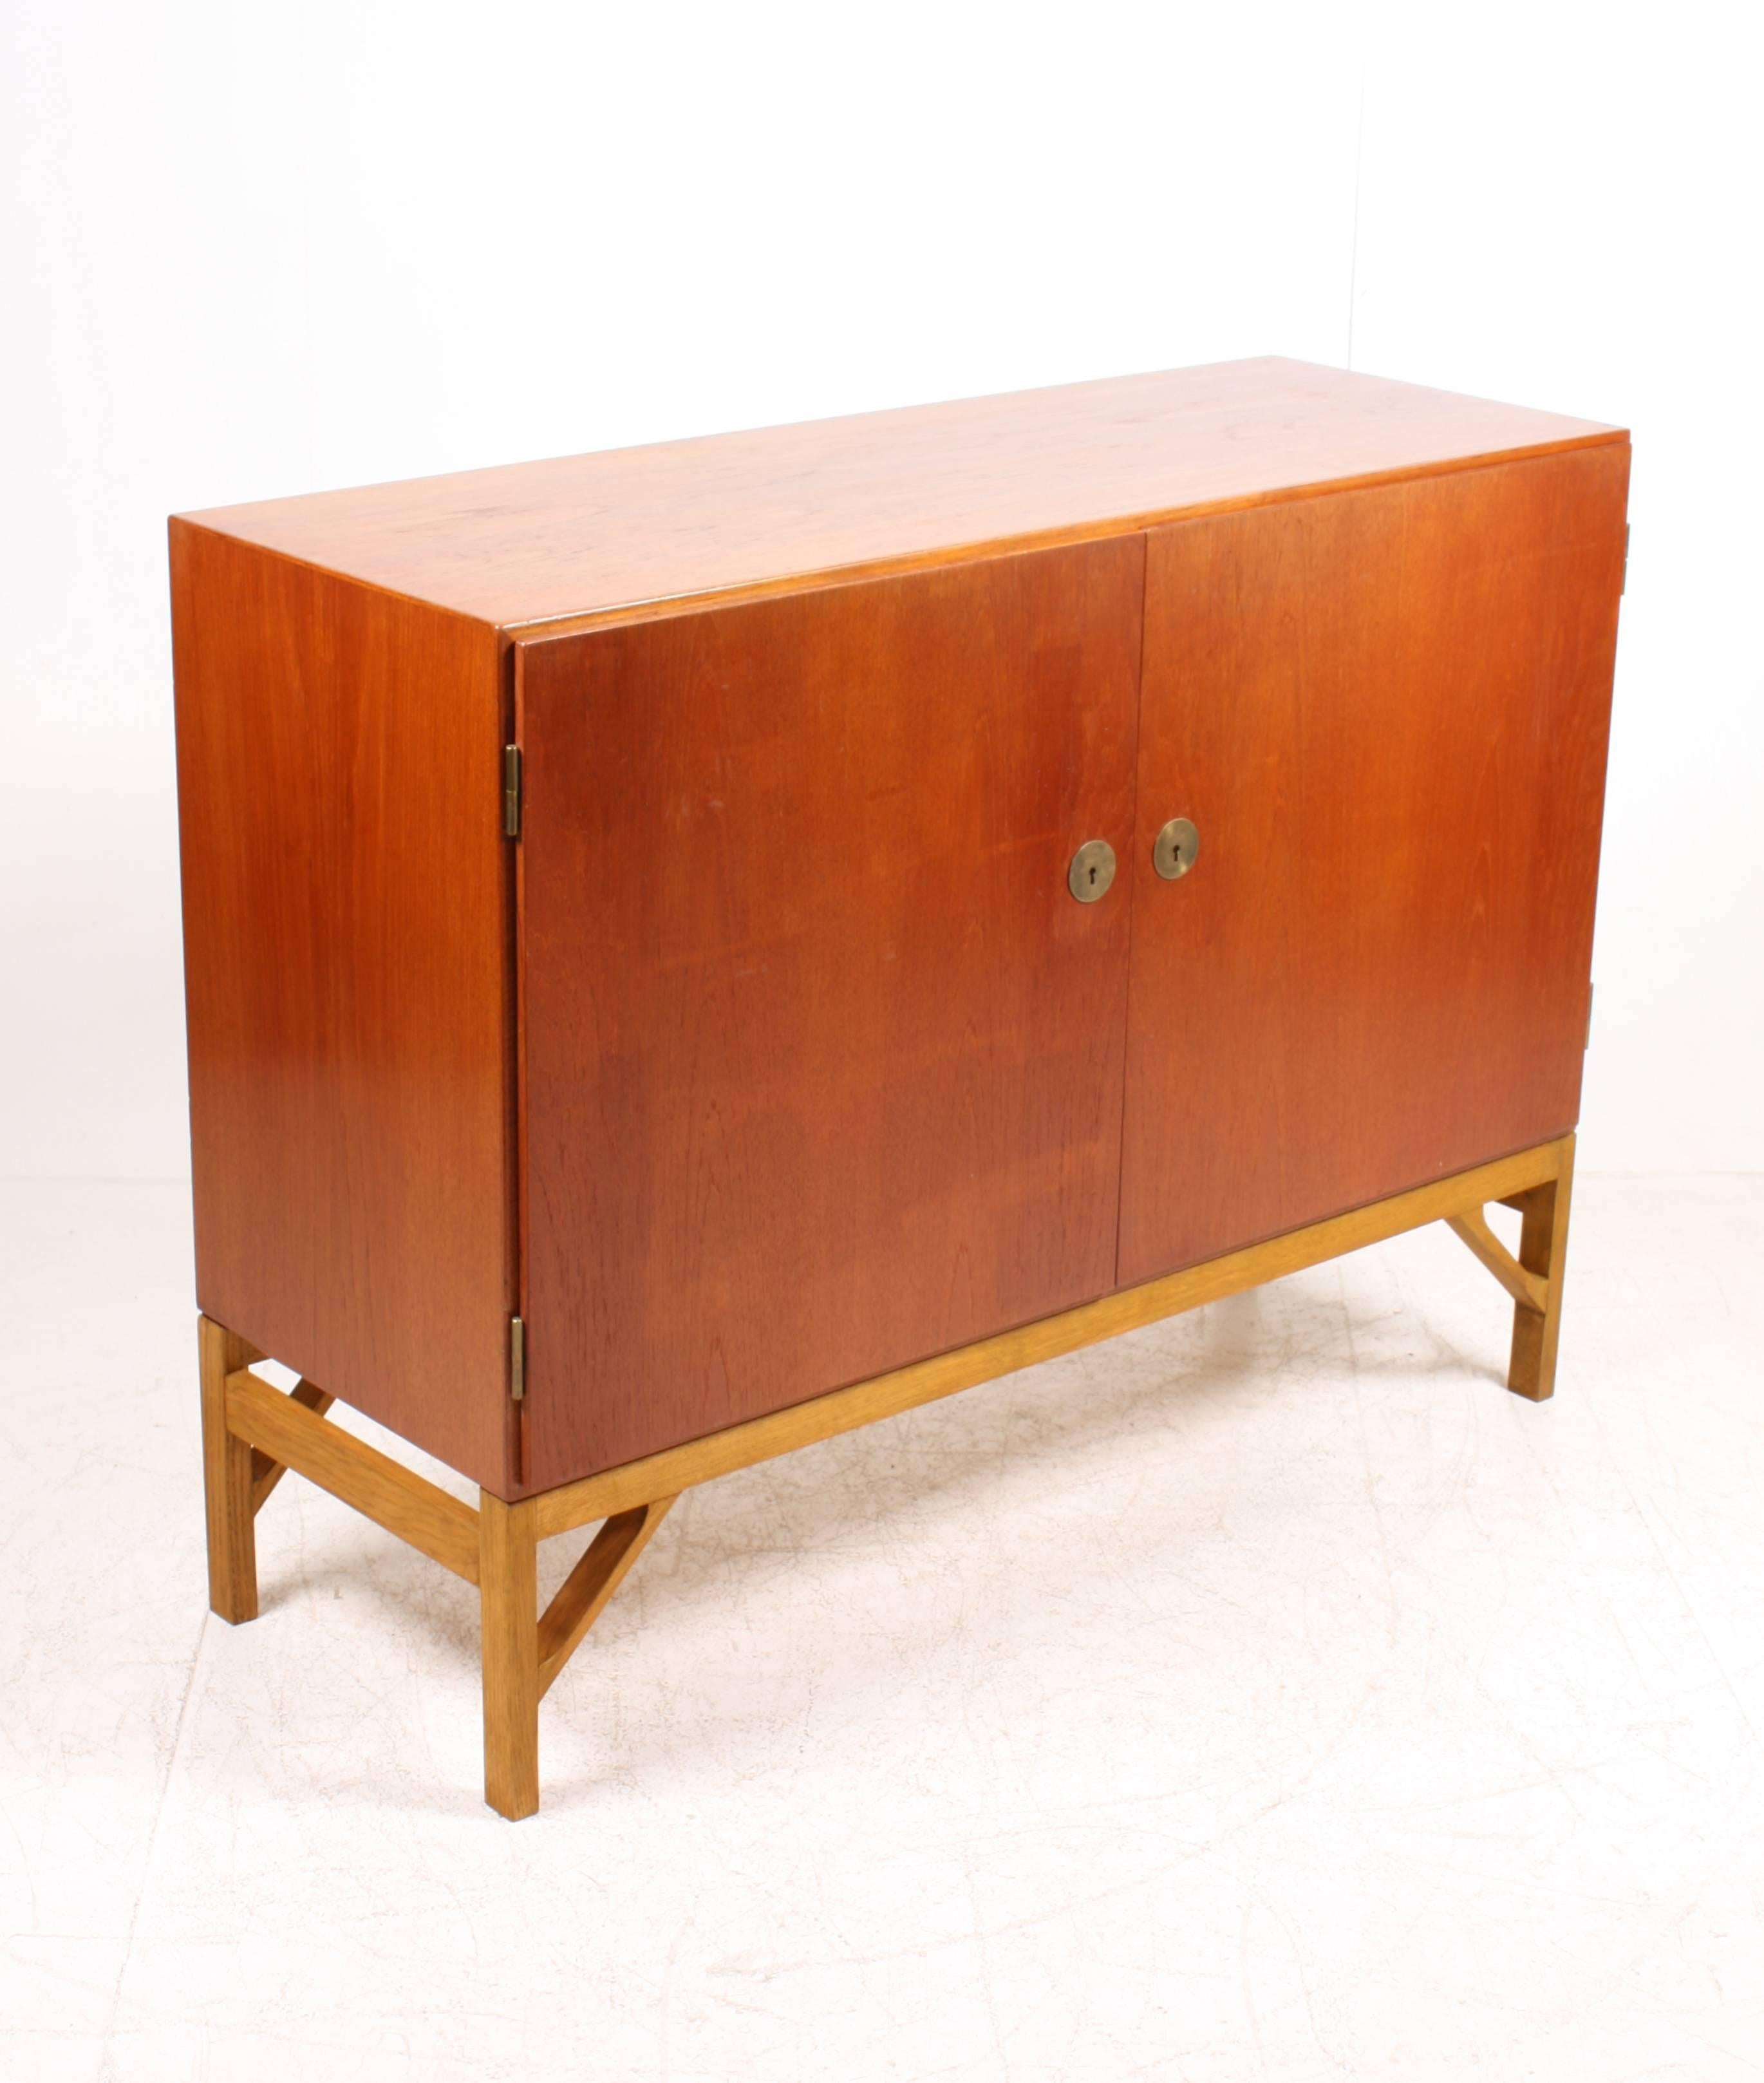 China cabinet in teak on an oak base with stunning hardware in brass and maple Interior. Designed by MAA. Børge Mogensen in the 1950s and this piece is made by CM Madsen cabinetmakers Denmark in the 1960s. Great original condition.